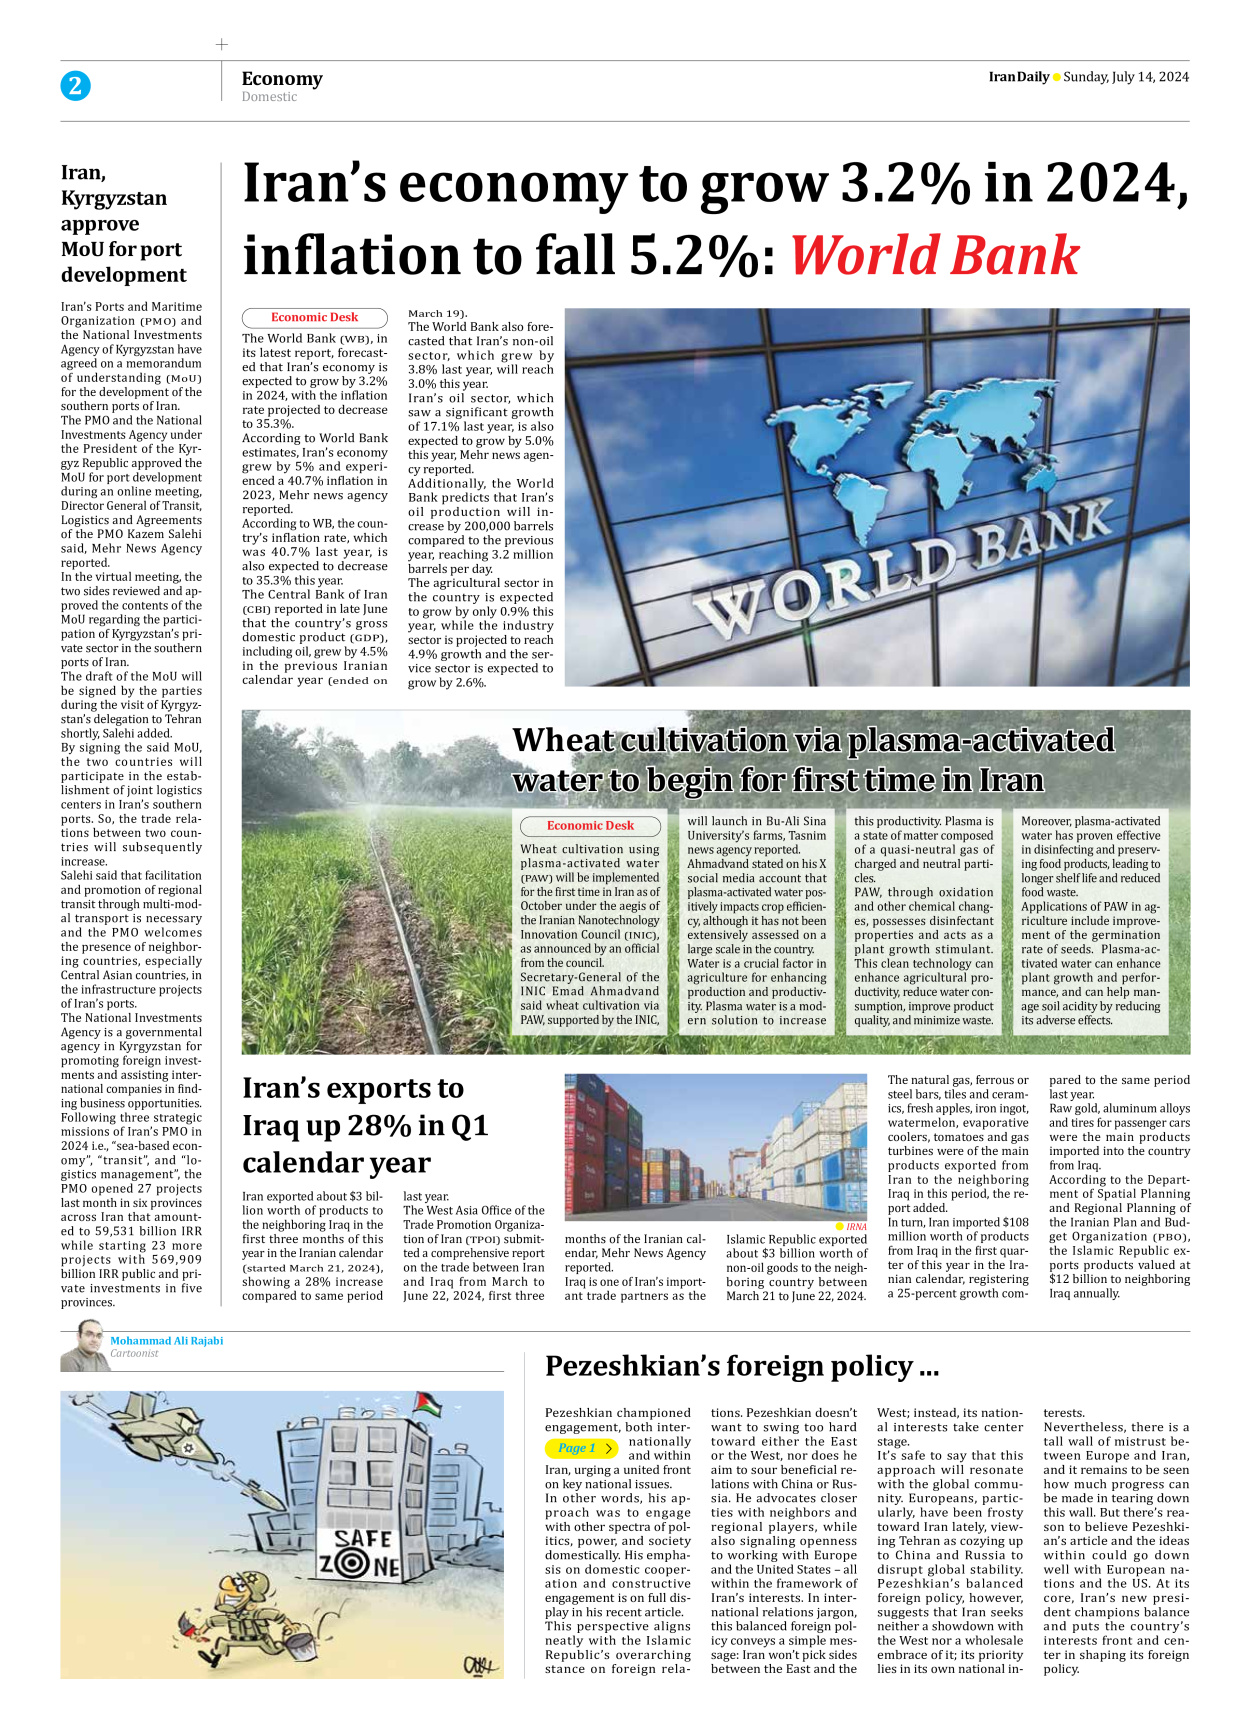 Iran Daily - Number Seven Thousand Six Hundred and Four - 14 July 2024 - Page 2